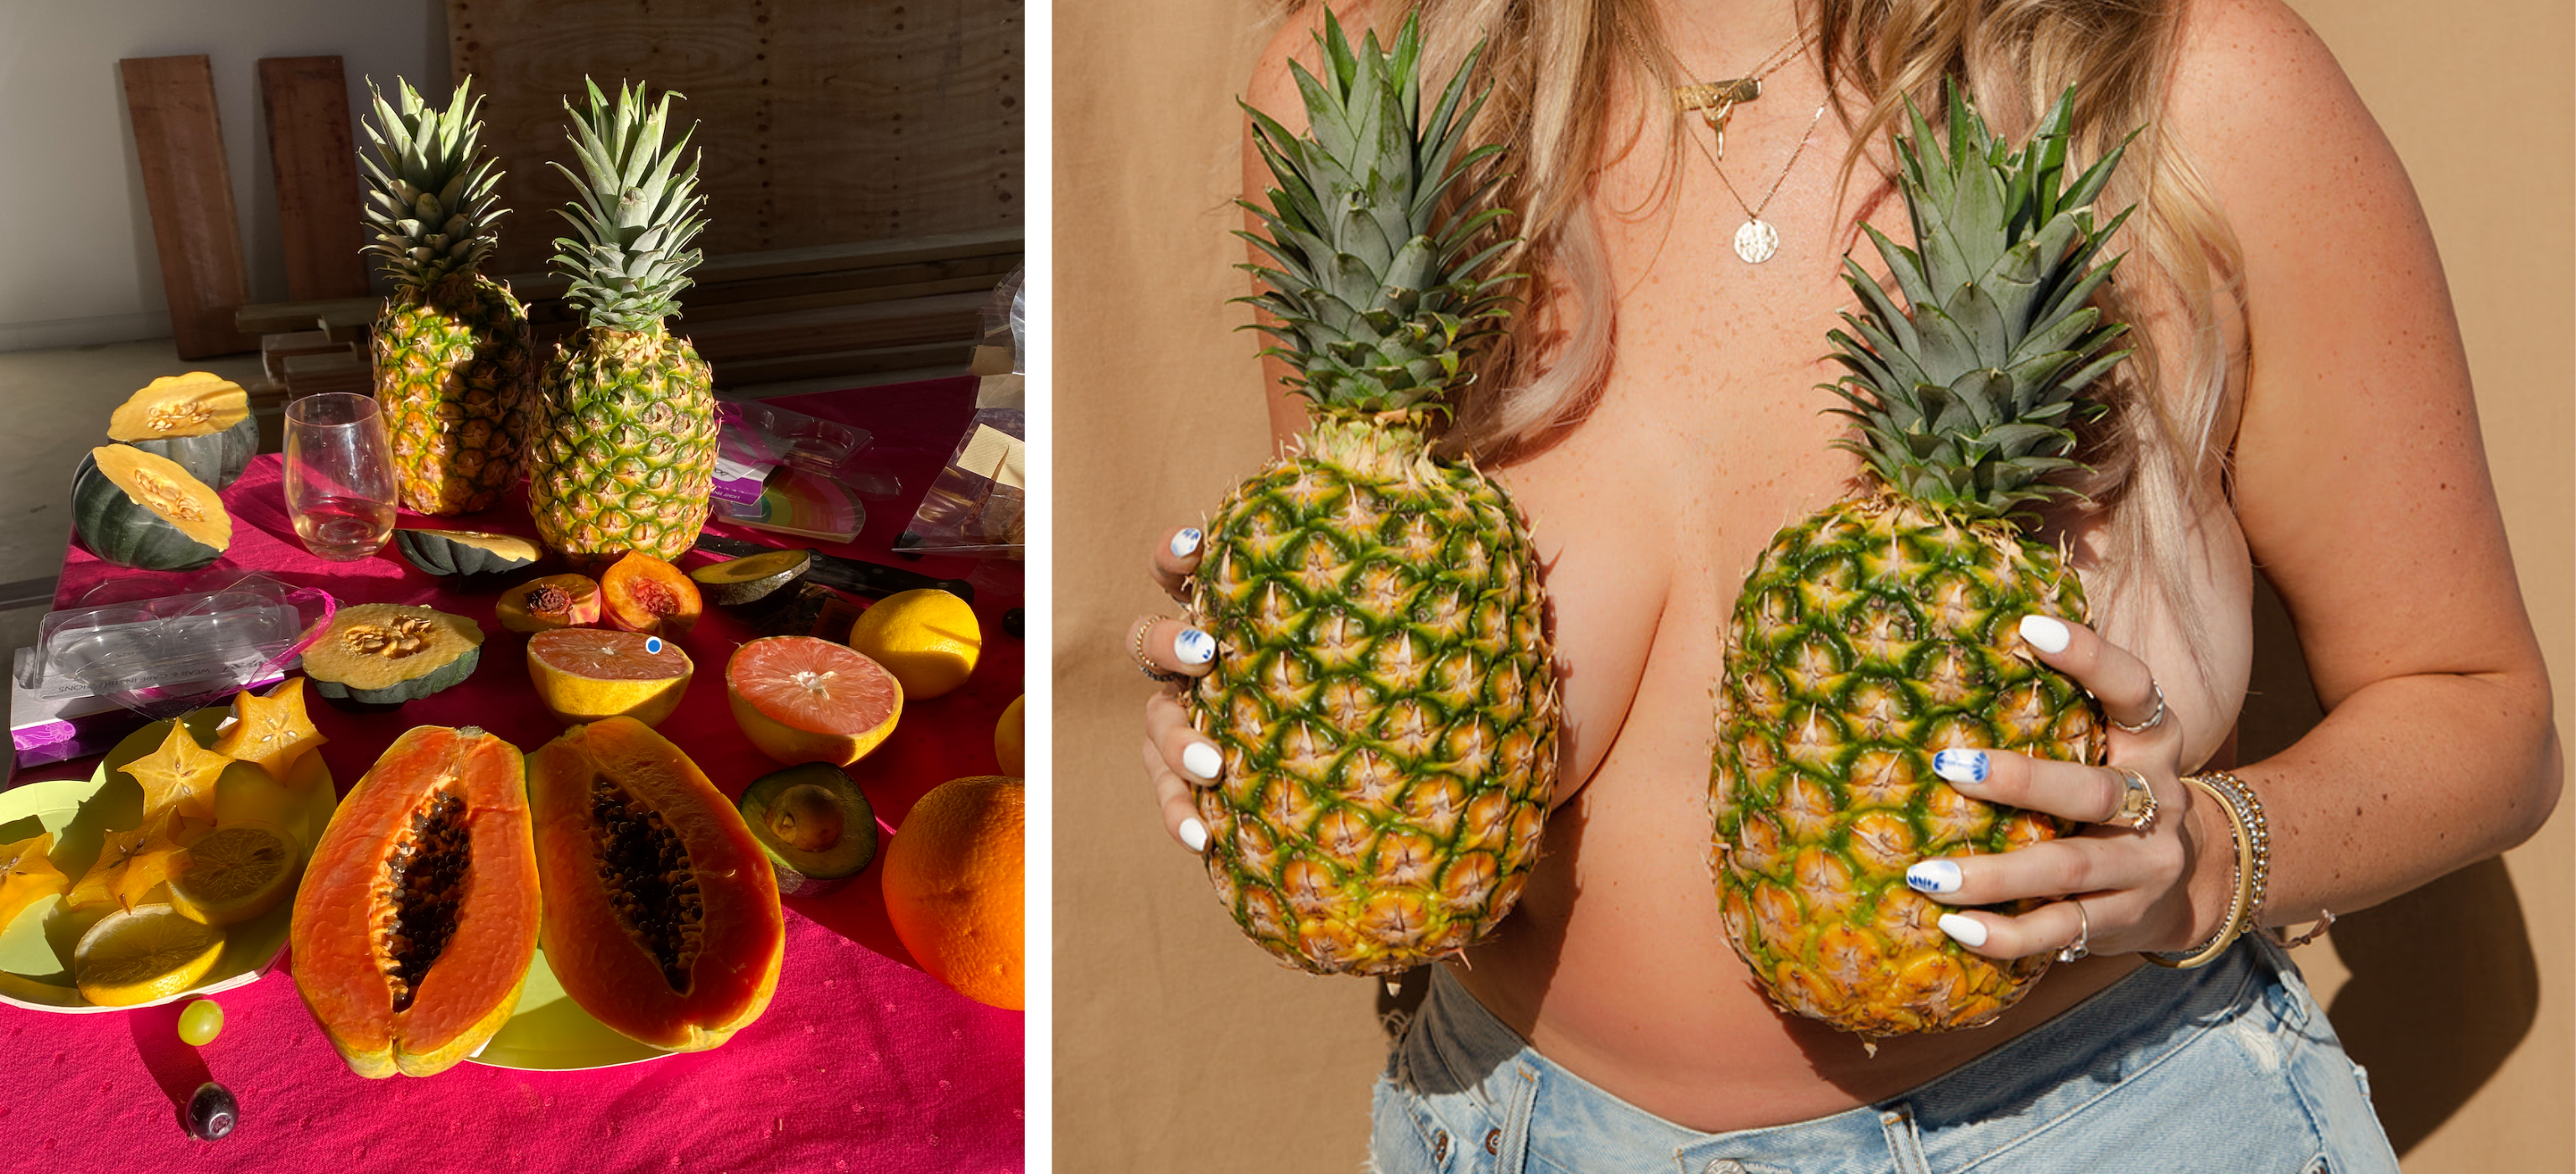 Fruit laid out on the table. Girl holding pineapples in front of her boobies. Fruity Boobies shoot! Body positivity / Confidence photoshoot